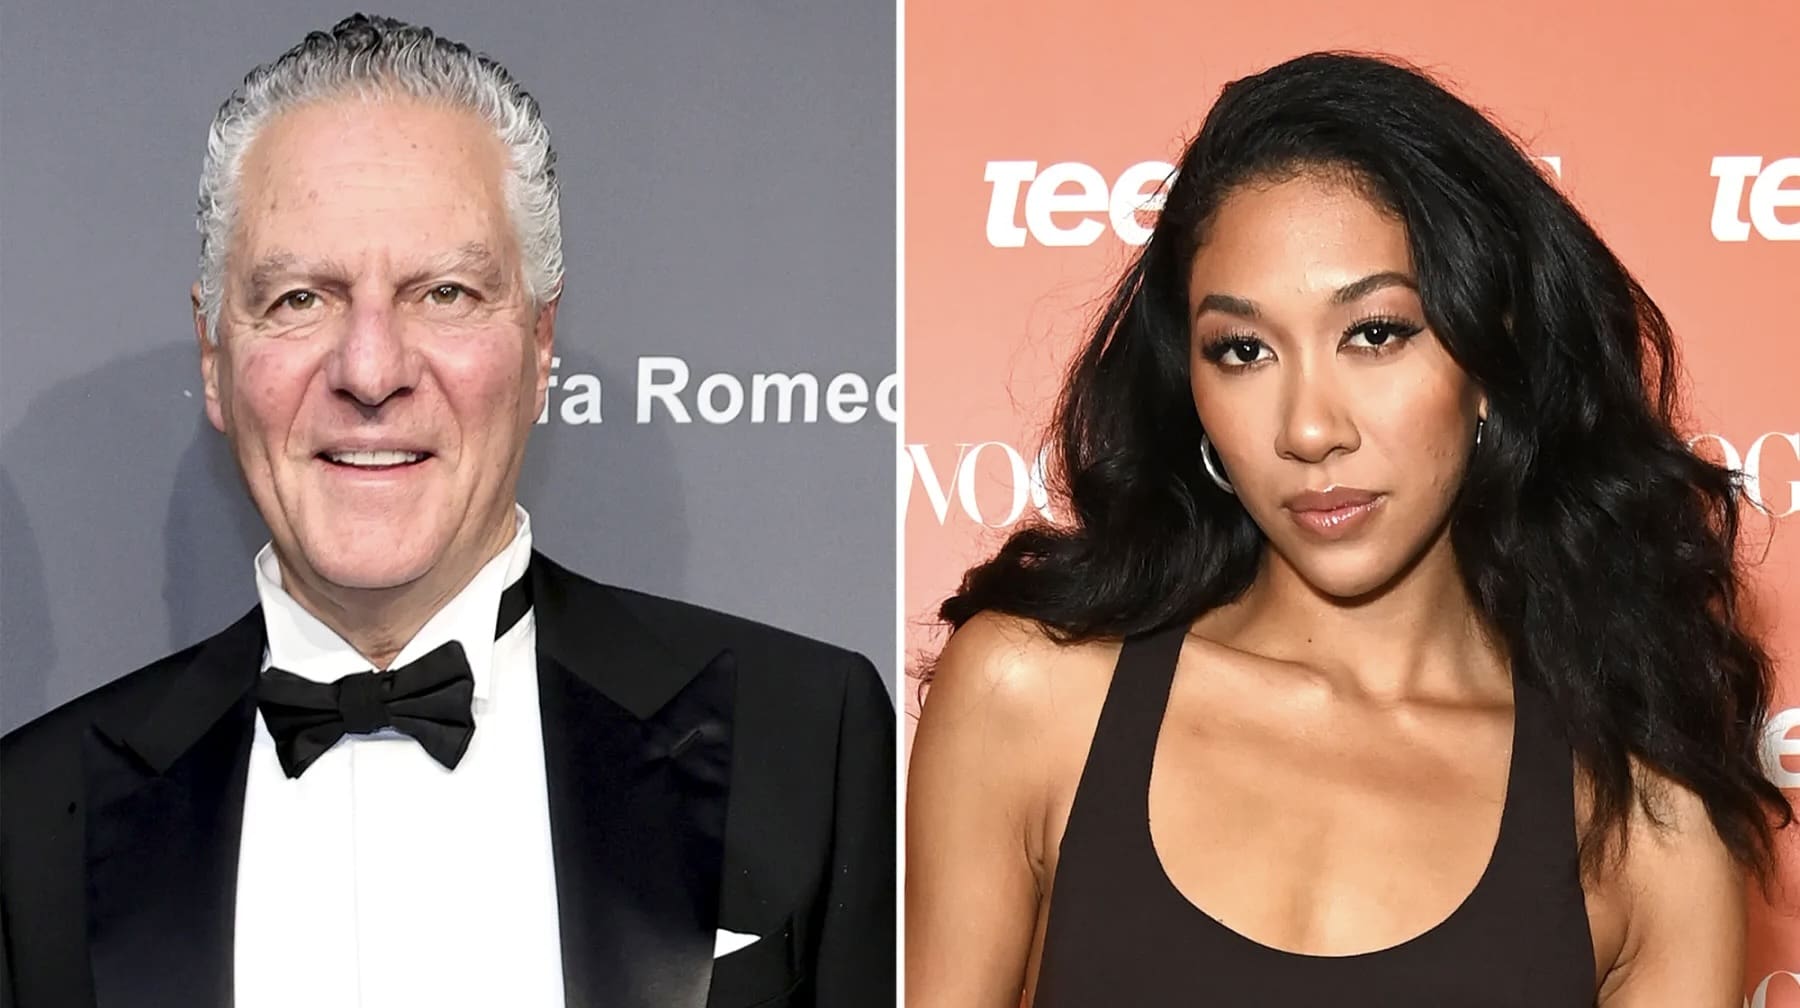 Report: Over Already? Aoki Lee Simmons, 21, and Vittorio Assaf, 65, Are ‘100% Done’ After Brief Fling